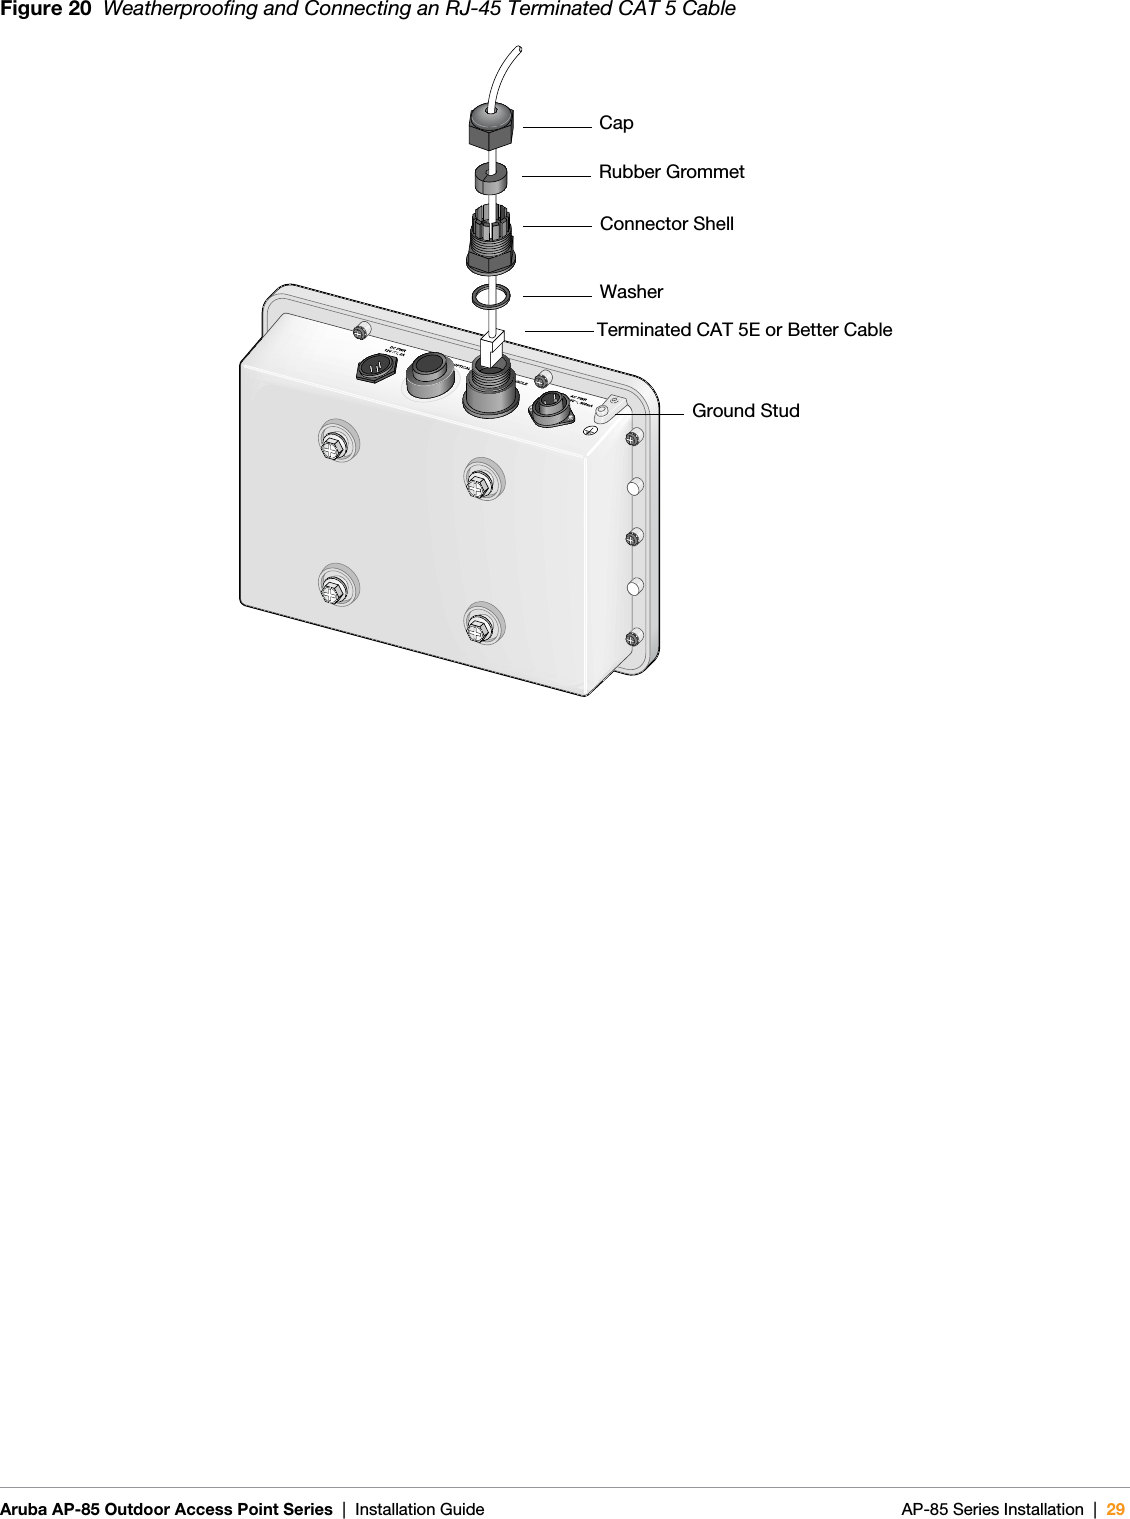  Aruba AP-85 Outdoor Access Point Series | Installation Guide AP-85 Series Installation | 29Figure 20  Weatherproofing and Connecting an RJ-45 Terminated CAT 5 Cablearun_0127CapRubber GrommetConnector ShellWasherTerminated CAT 5E or Better CableGround Stud